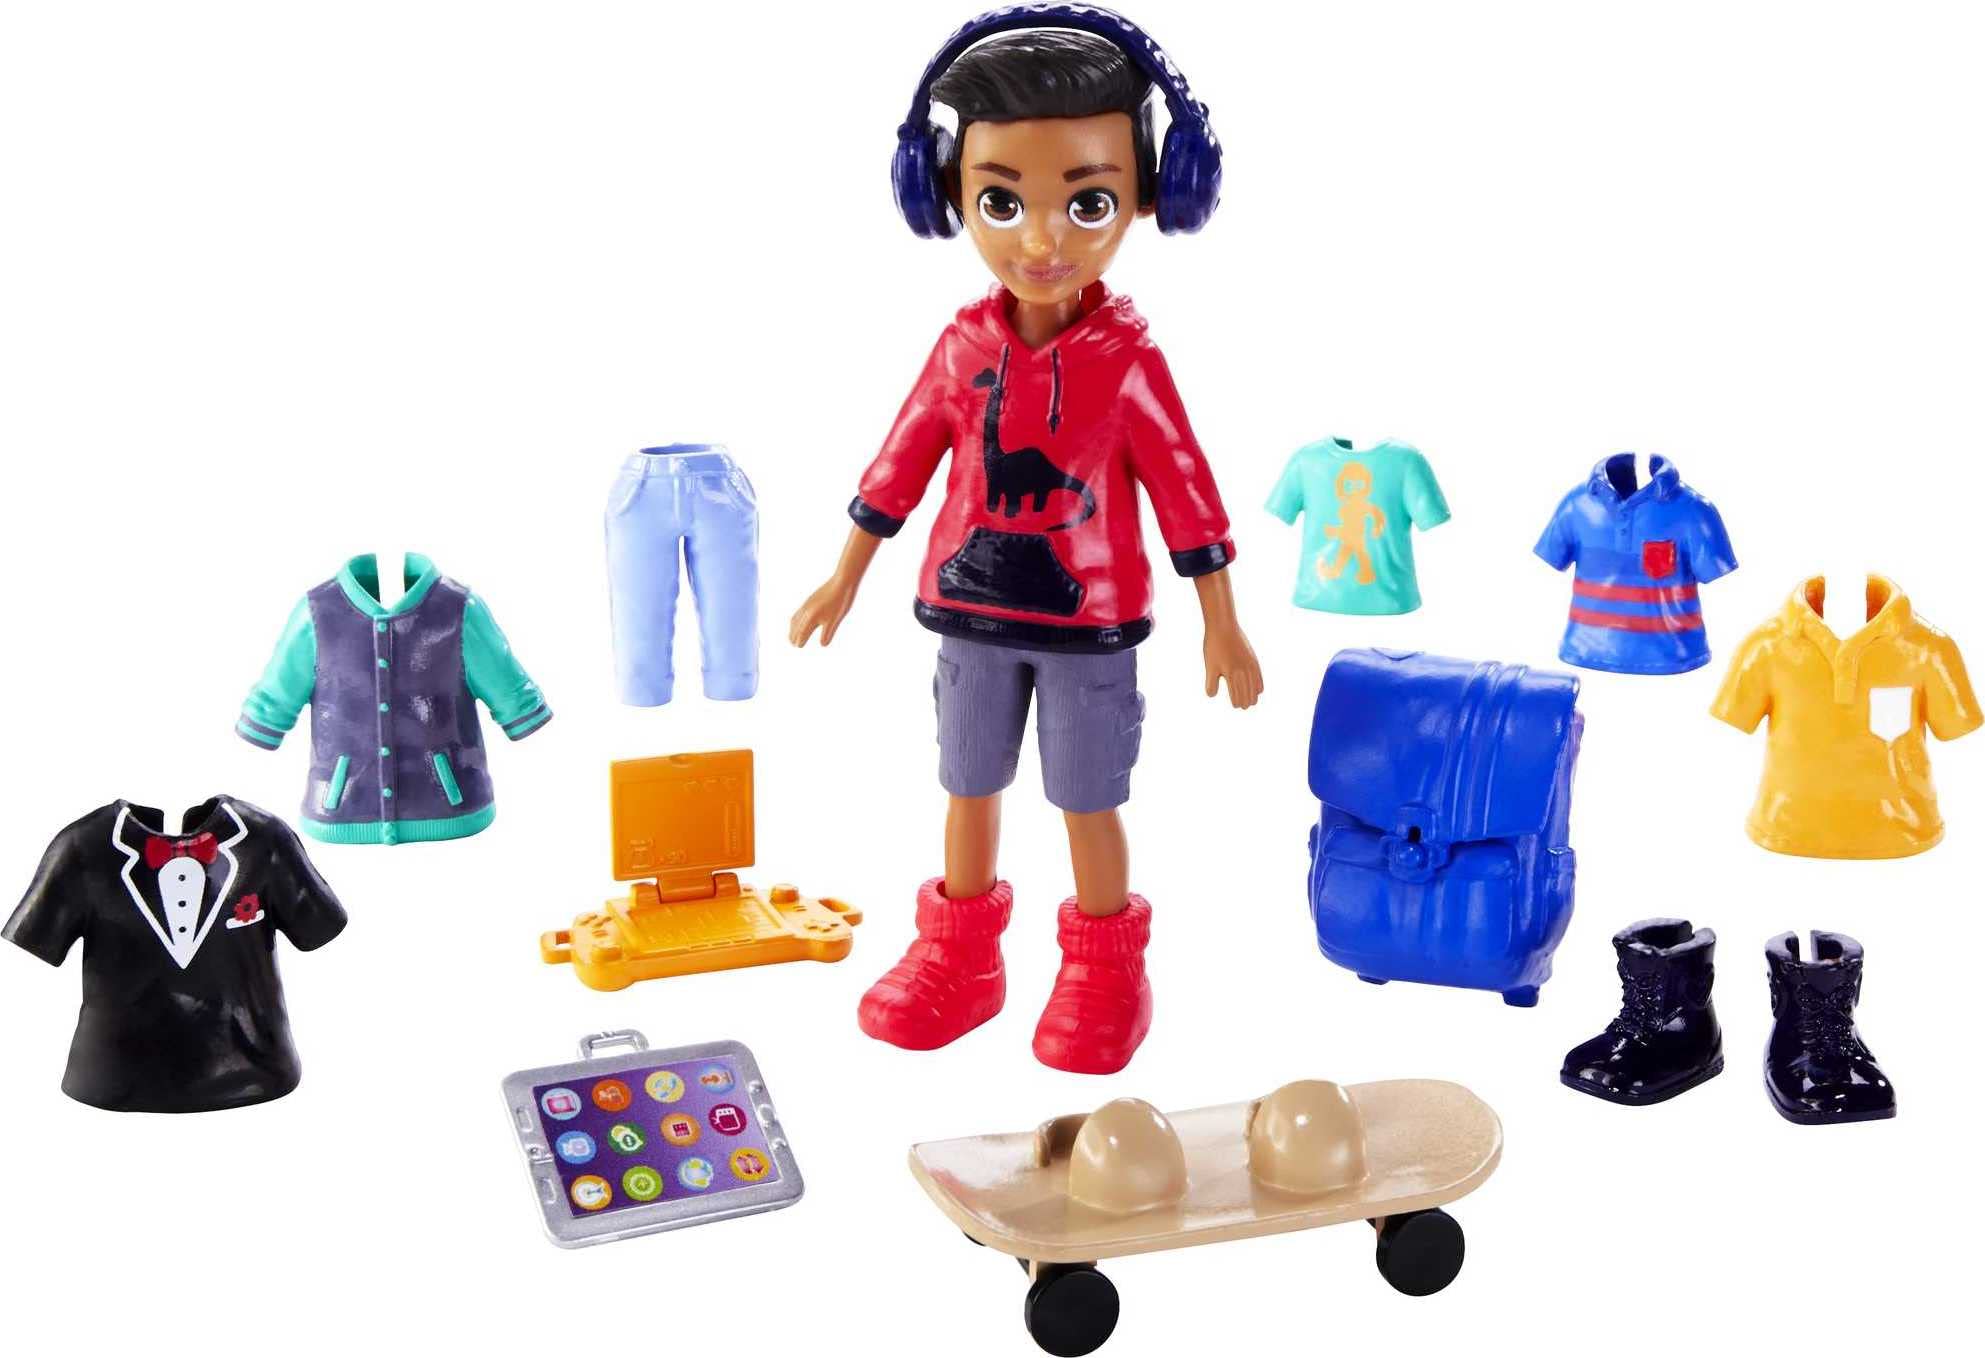 Polly Pocket Travel Toy Playset with Four (3-Inch) Dolls and 40+ Fashion Accessories, Themed Characters Fashion Pack (Amazon Exclusive)